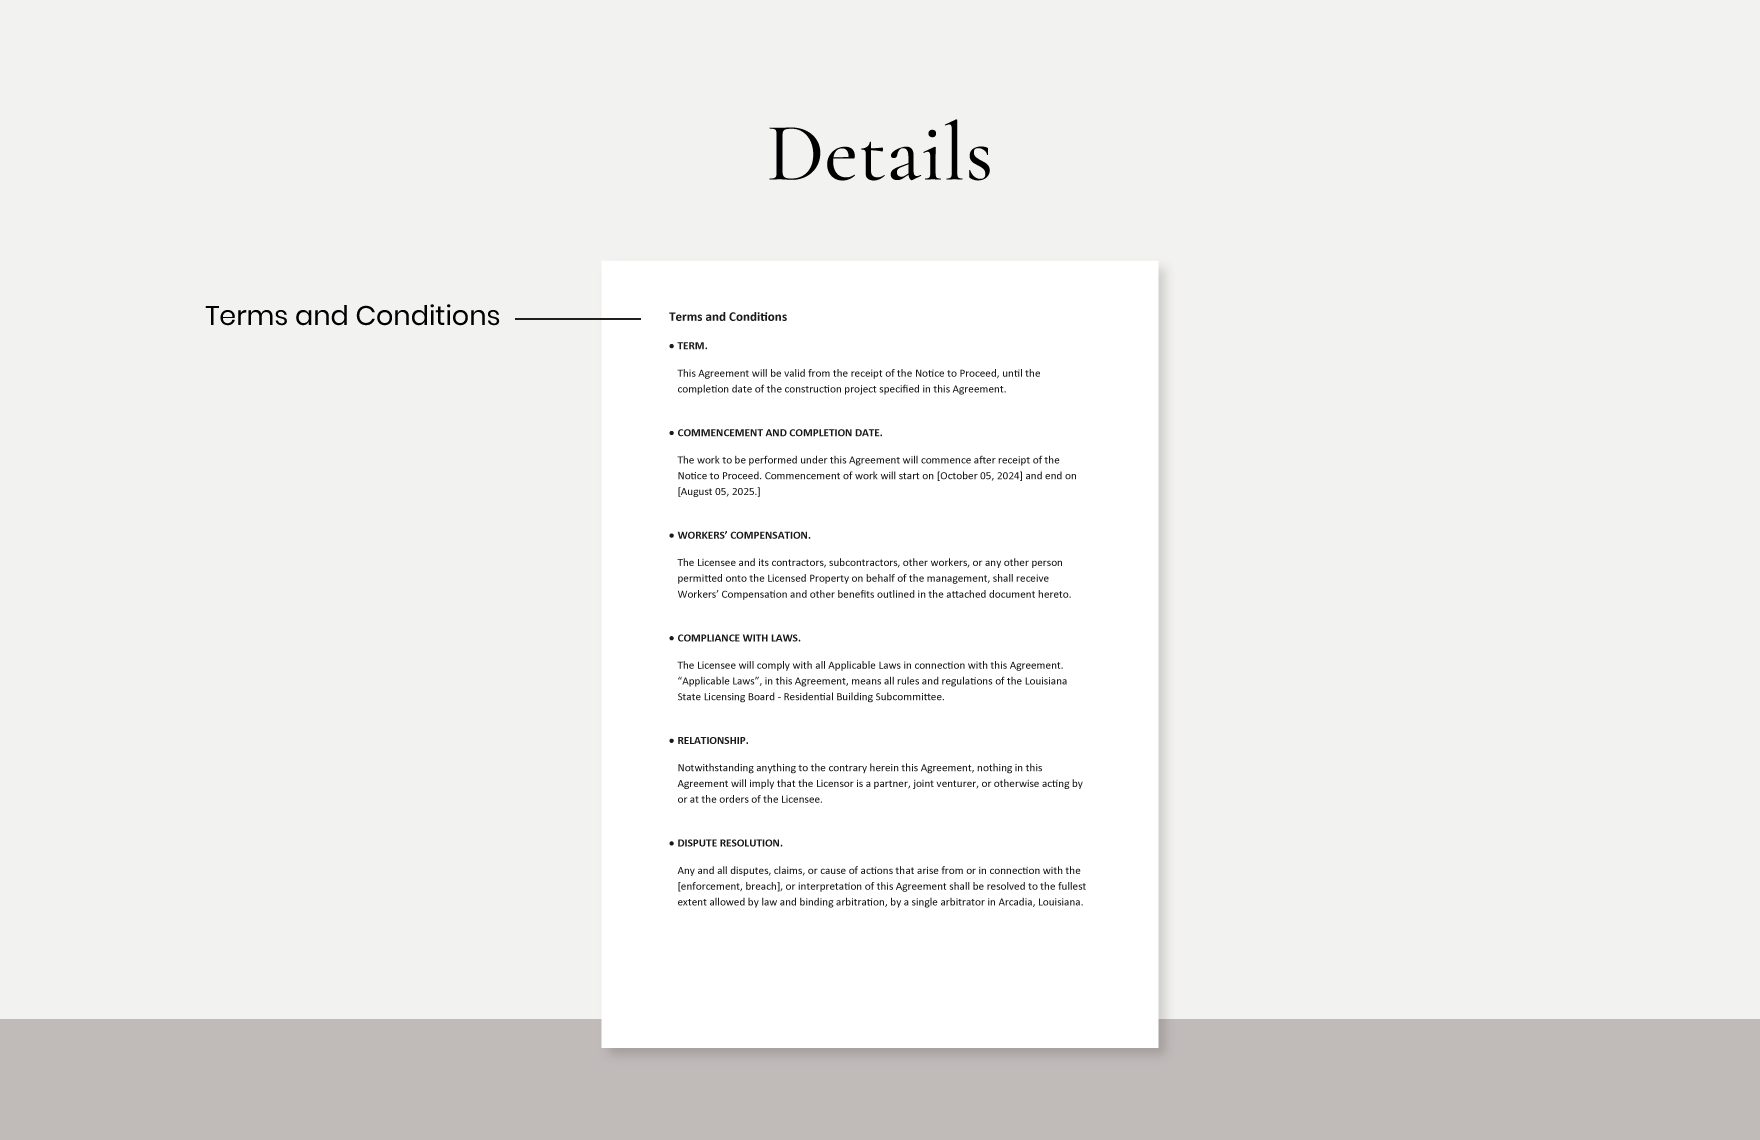 Construction License Agreement Template